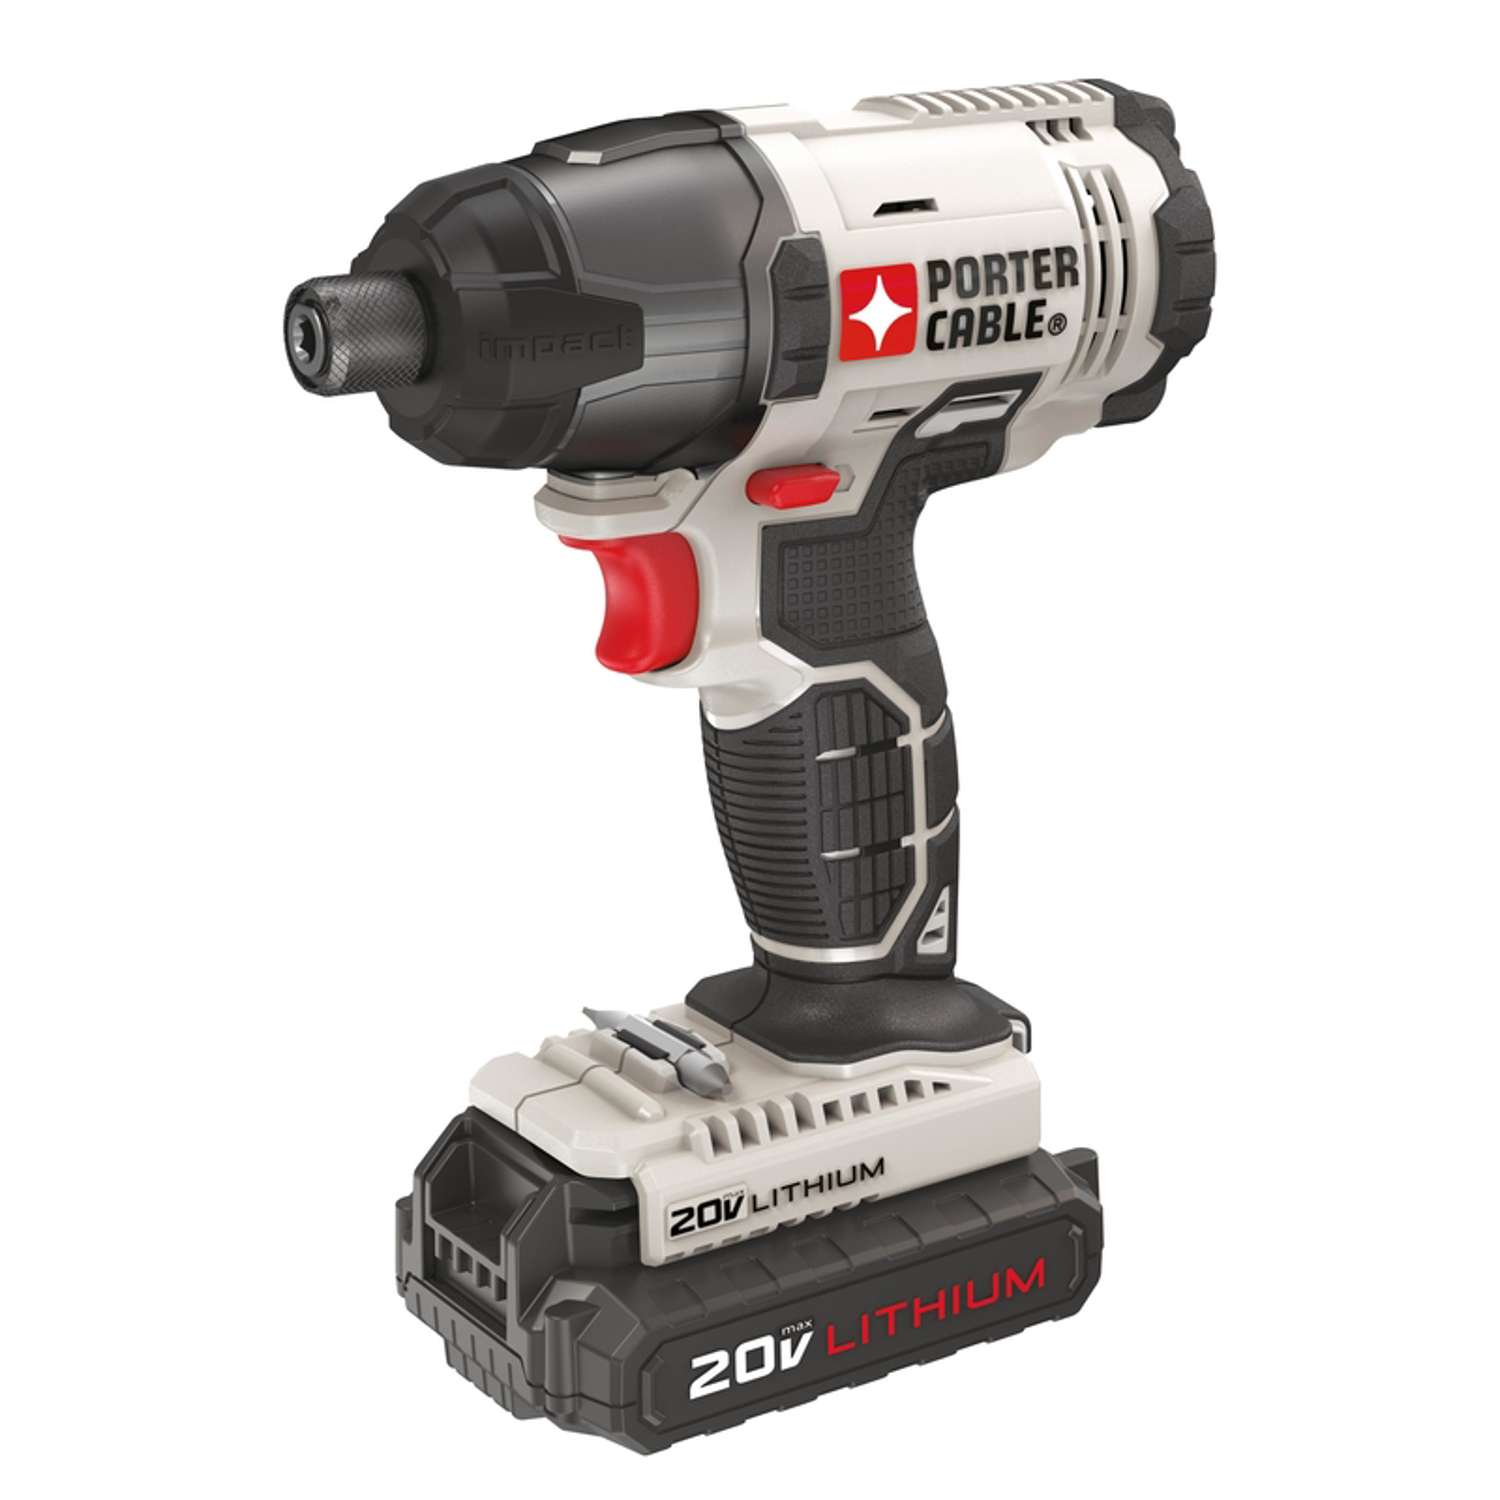 Black+Decker BCD702C1 Cordless Drill & Impact Driver Review - Consumer  Reports